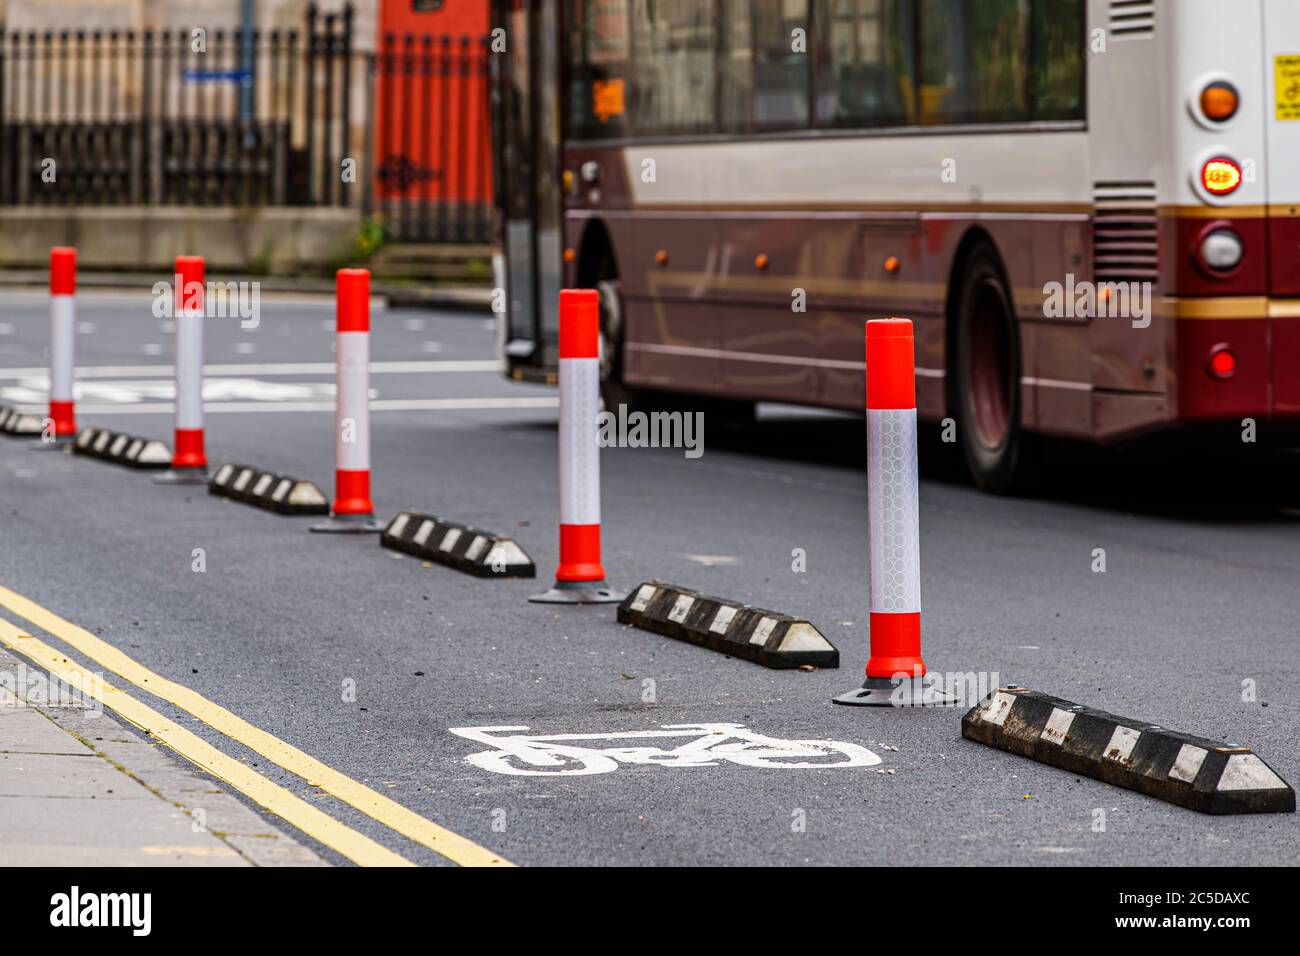 Edinburgh, Scotland, UK. 2 July, 2020. Edinburgh City Council have installed temporary segregated cycle lanes on a number of key City Centre routes, like here on George IV Bridge. Andrew Perry/Alamy Live News Stock Photo